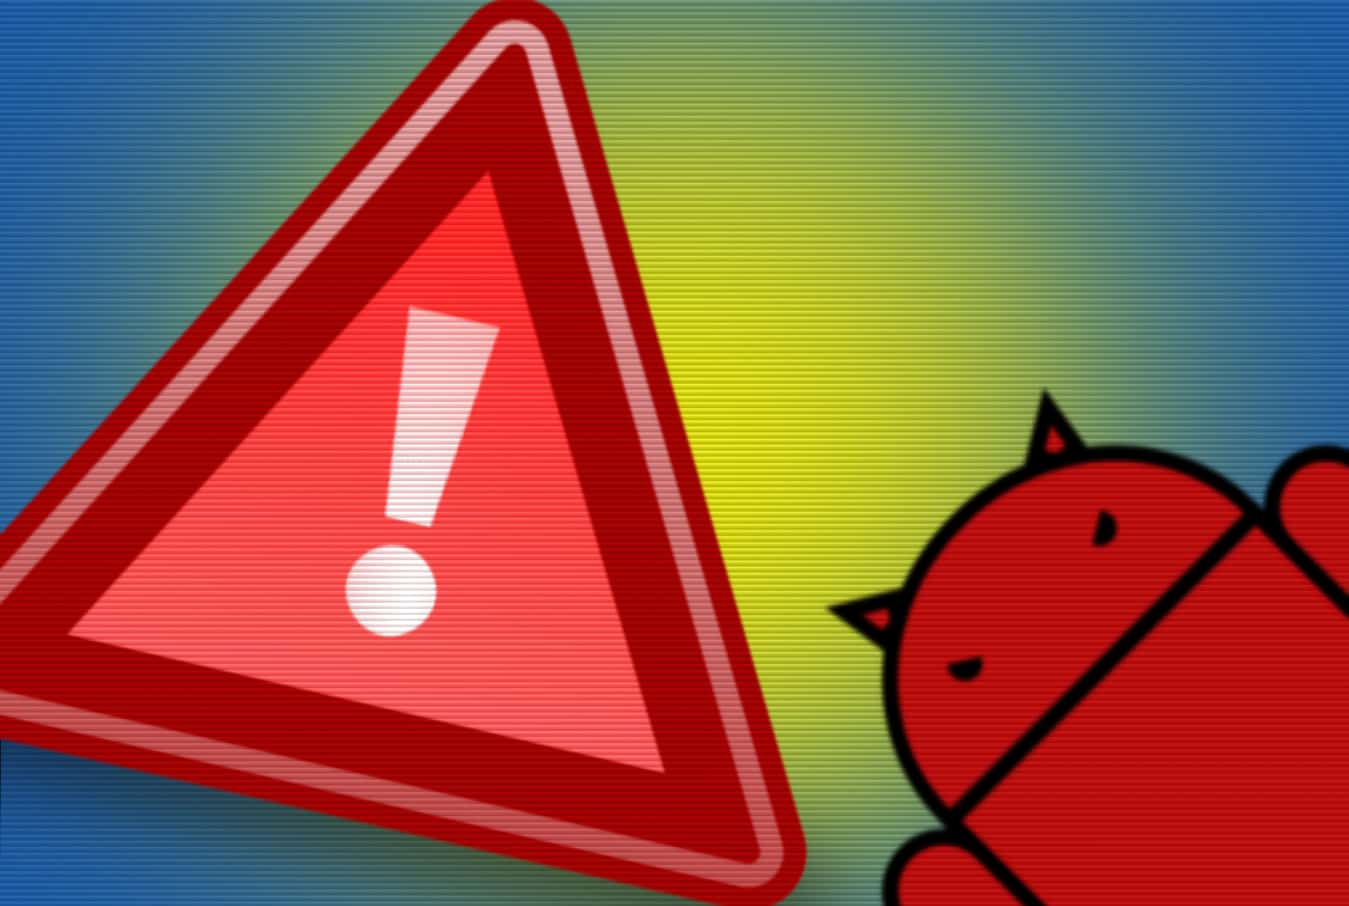 New malware fraudulently subscribes victims to premium phone services